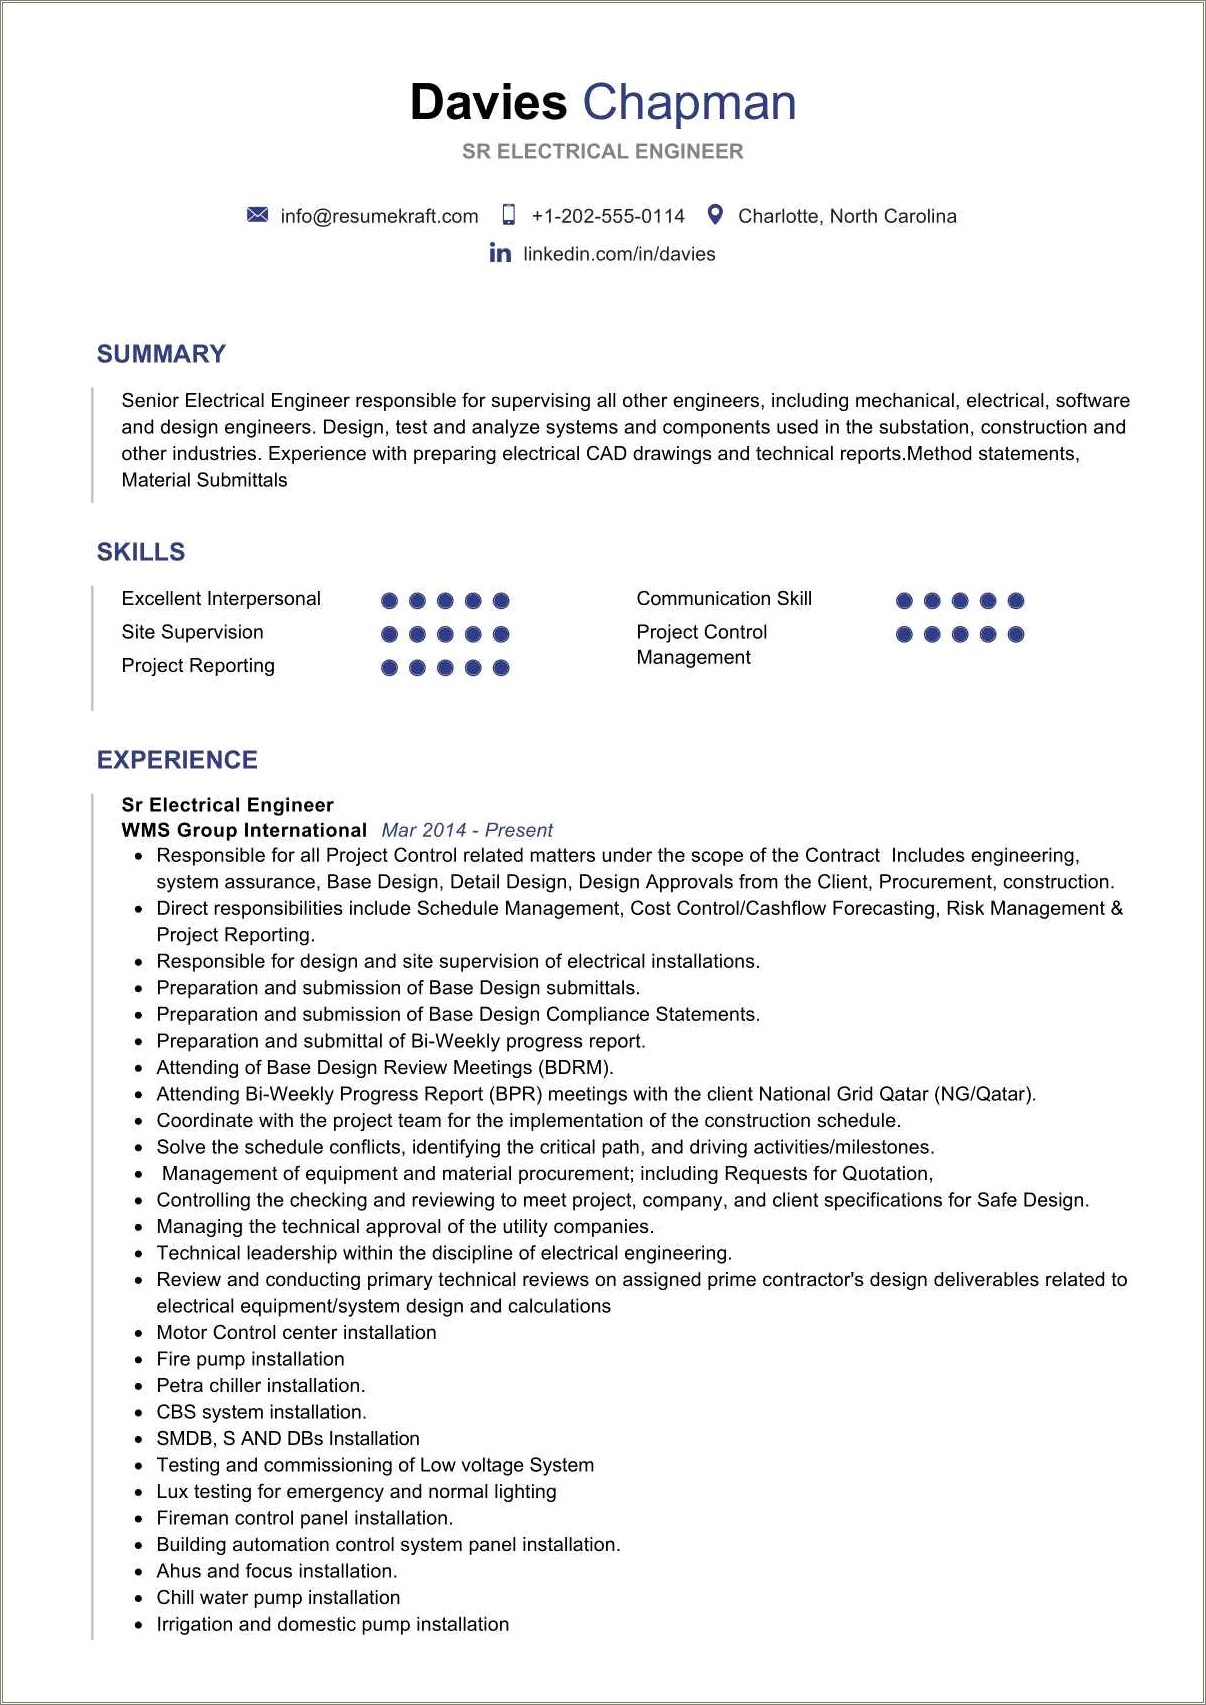 Electrical Job Skills For Resume